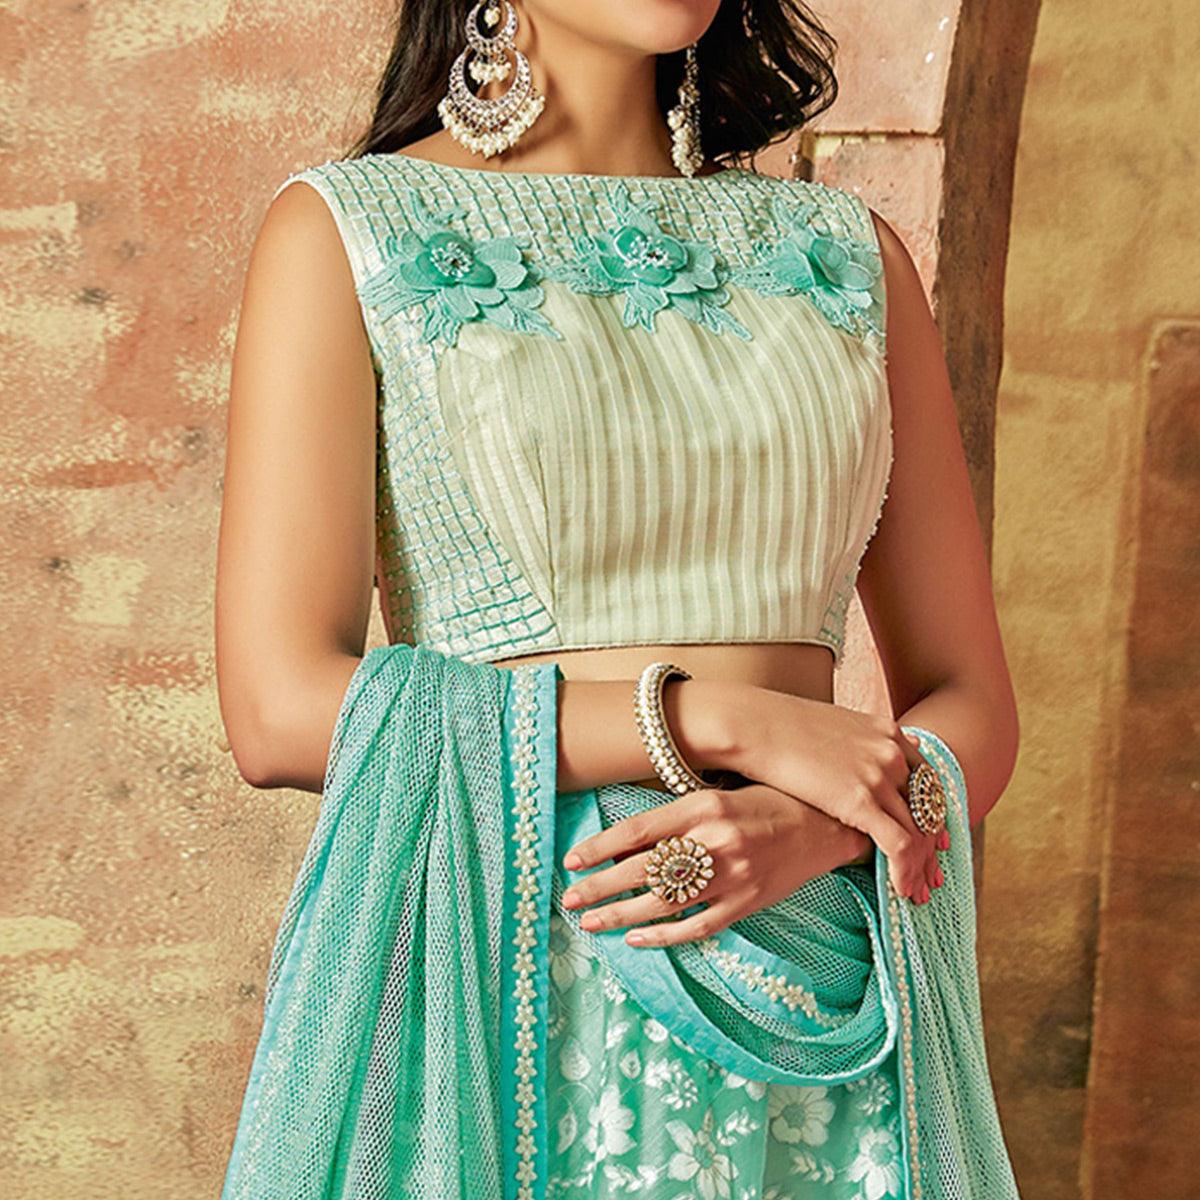 Excellent Sea Green Colored Partywear Embroidered Tissue Lehenga Choli - Peachmode